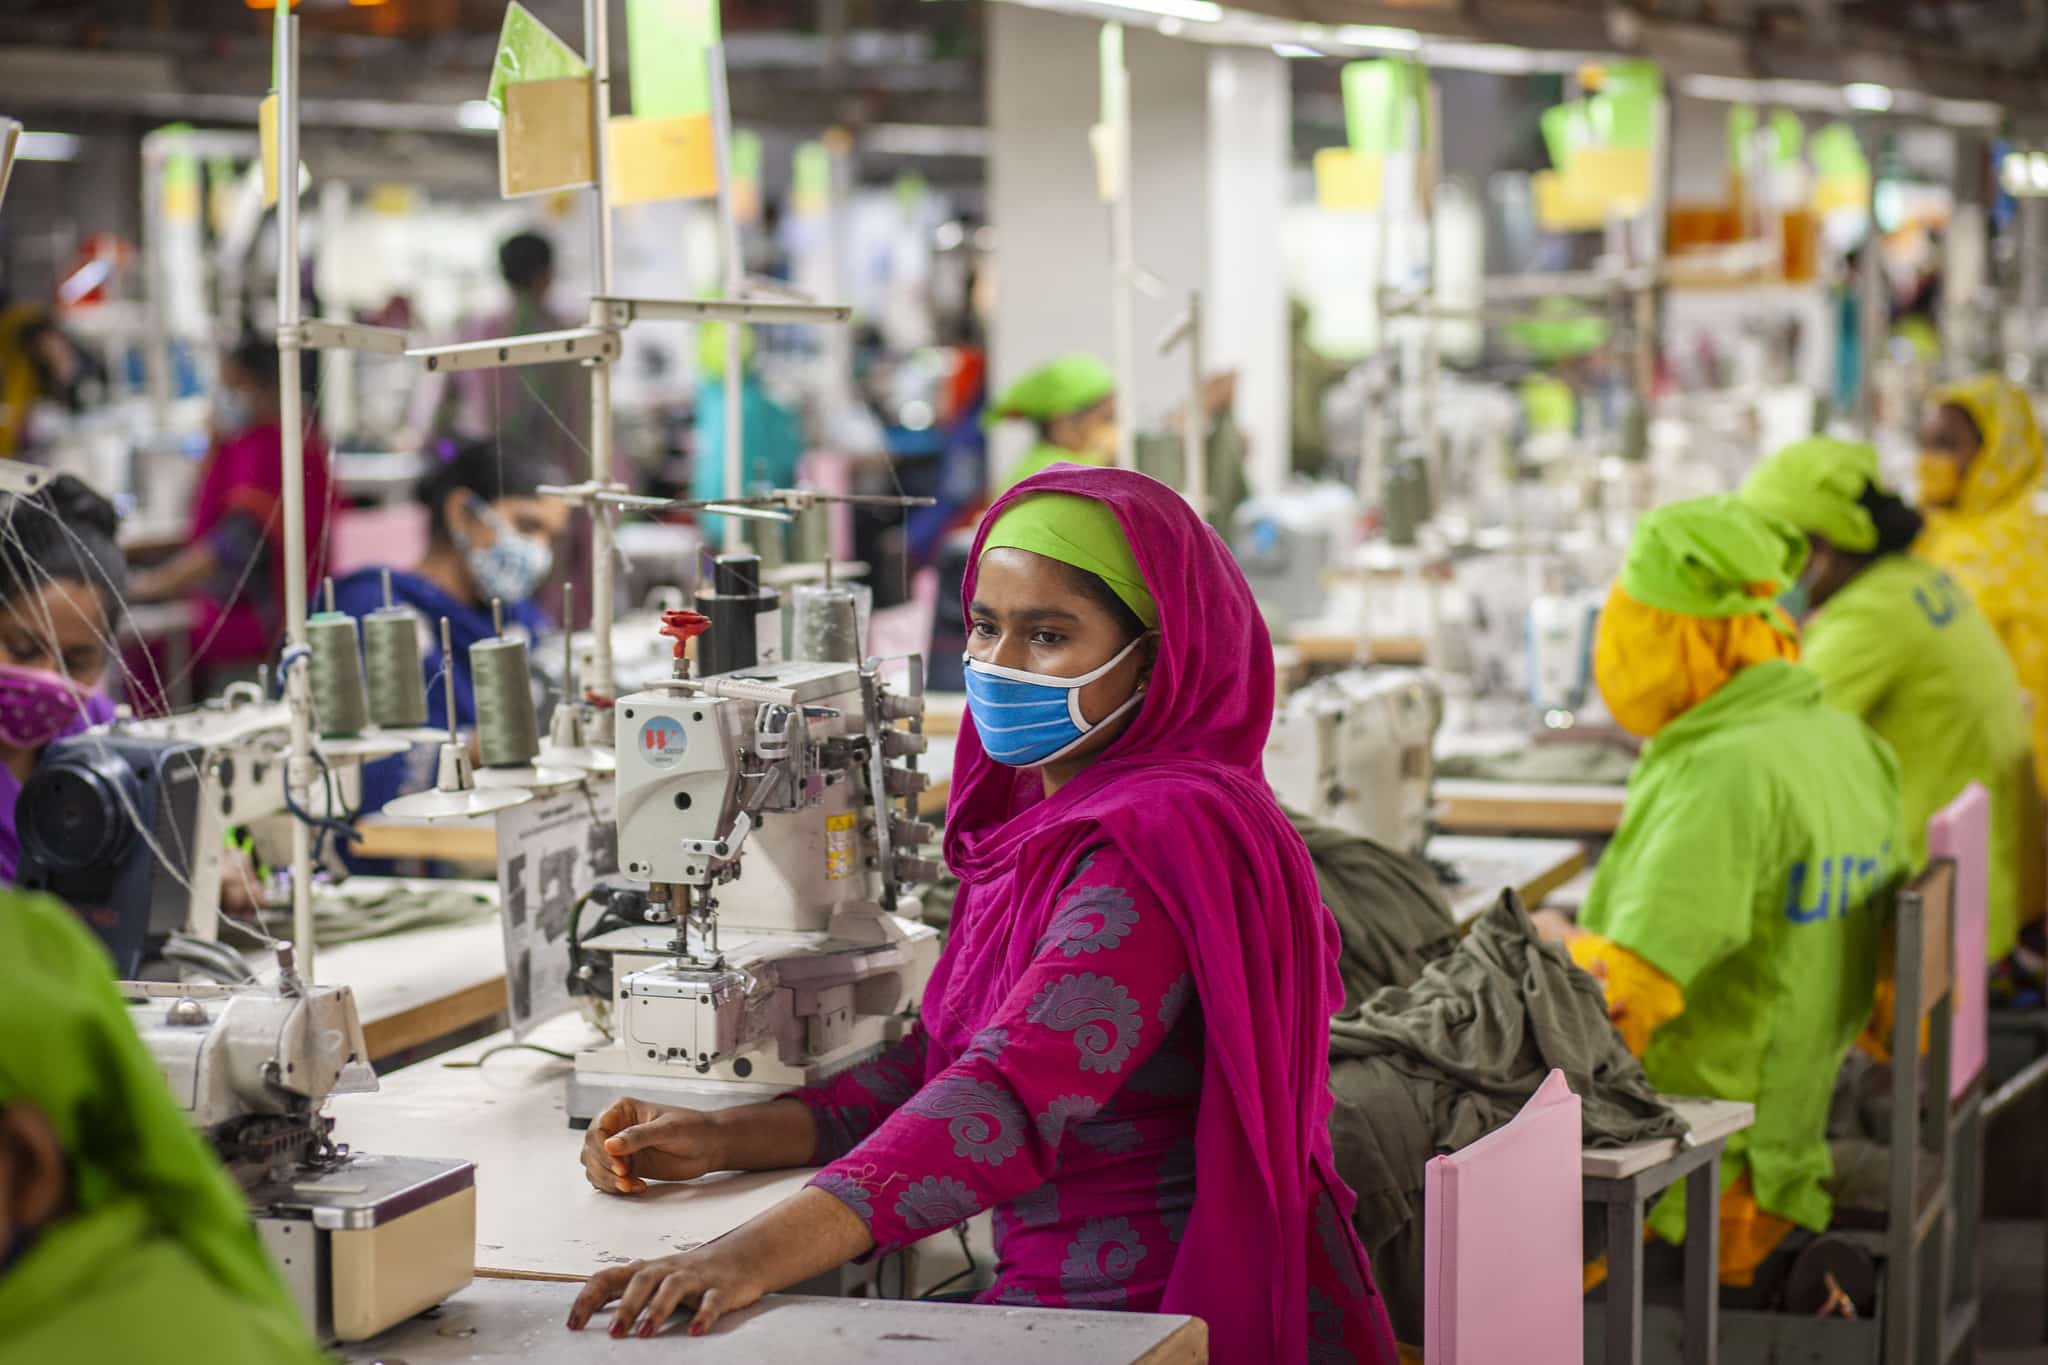 Seeing Executives setting for healthy workforce in Garment Sector